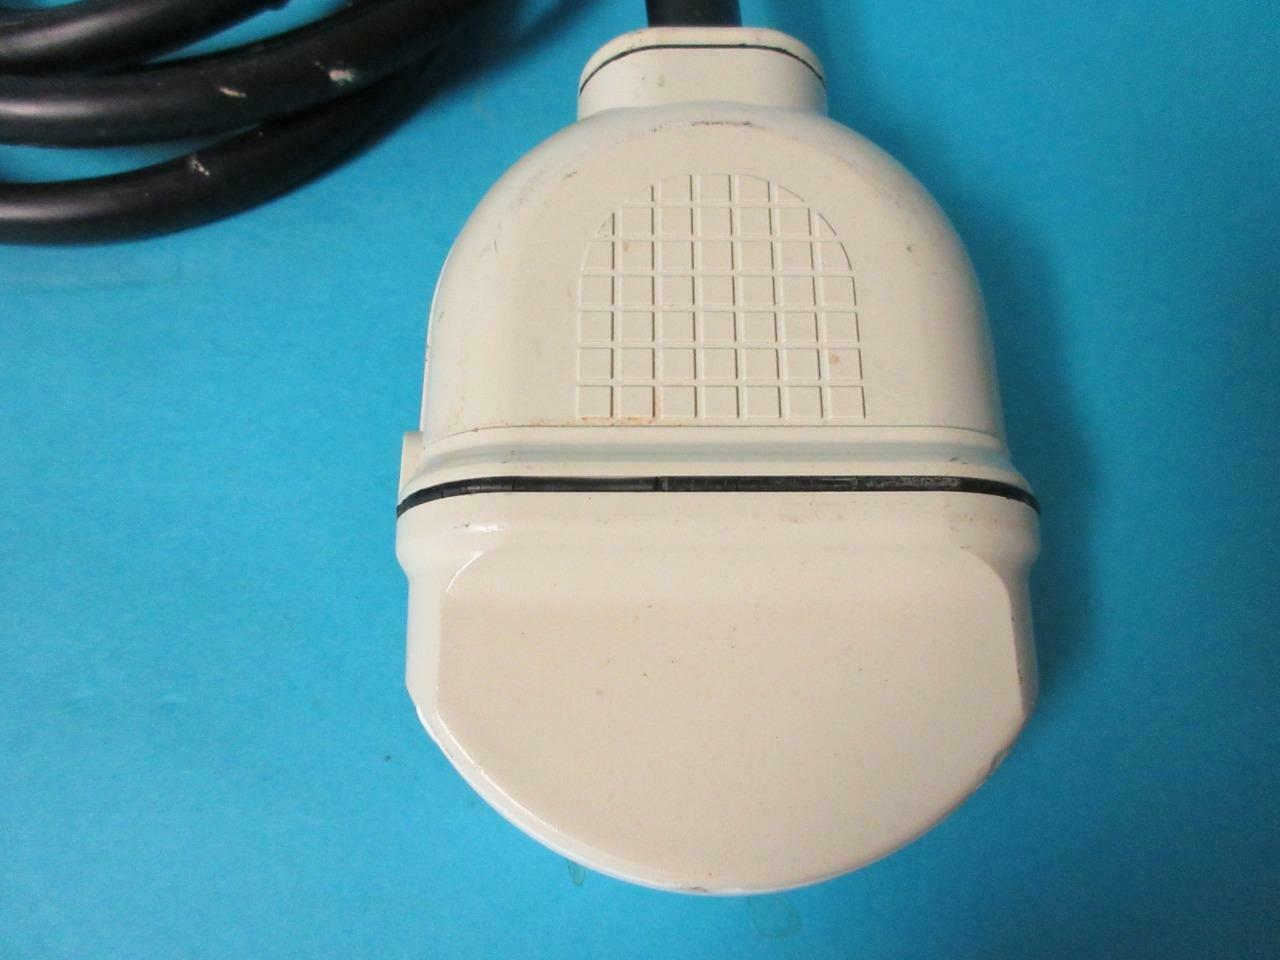 PHILIPS MEDICAL SYSTEMS ULTRASOUND PROBE C3540DF 401794 9896 000 58211 3.5/5 MHZ DIAGNOSTIC ULTRASOUND MACHINES FOR SALE